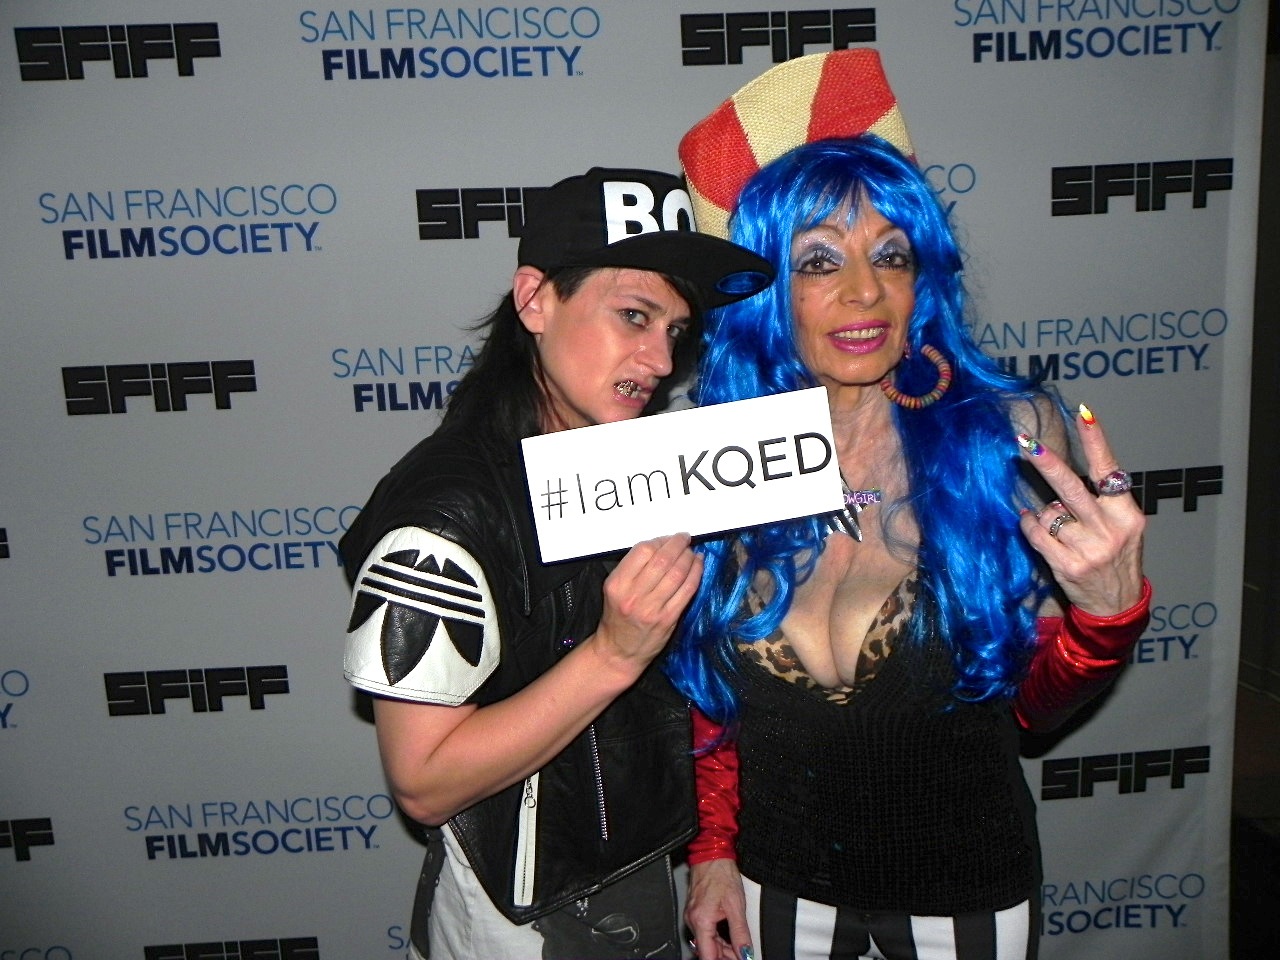 Peaches and Sandy Kane on the red carpet at the recent San Francisco International Film Festival.